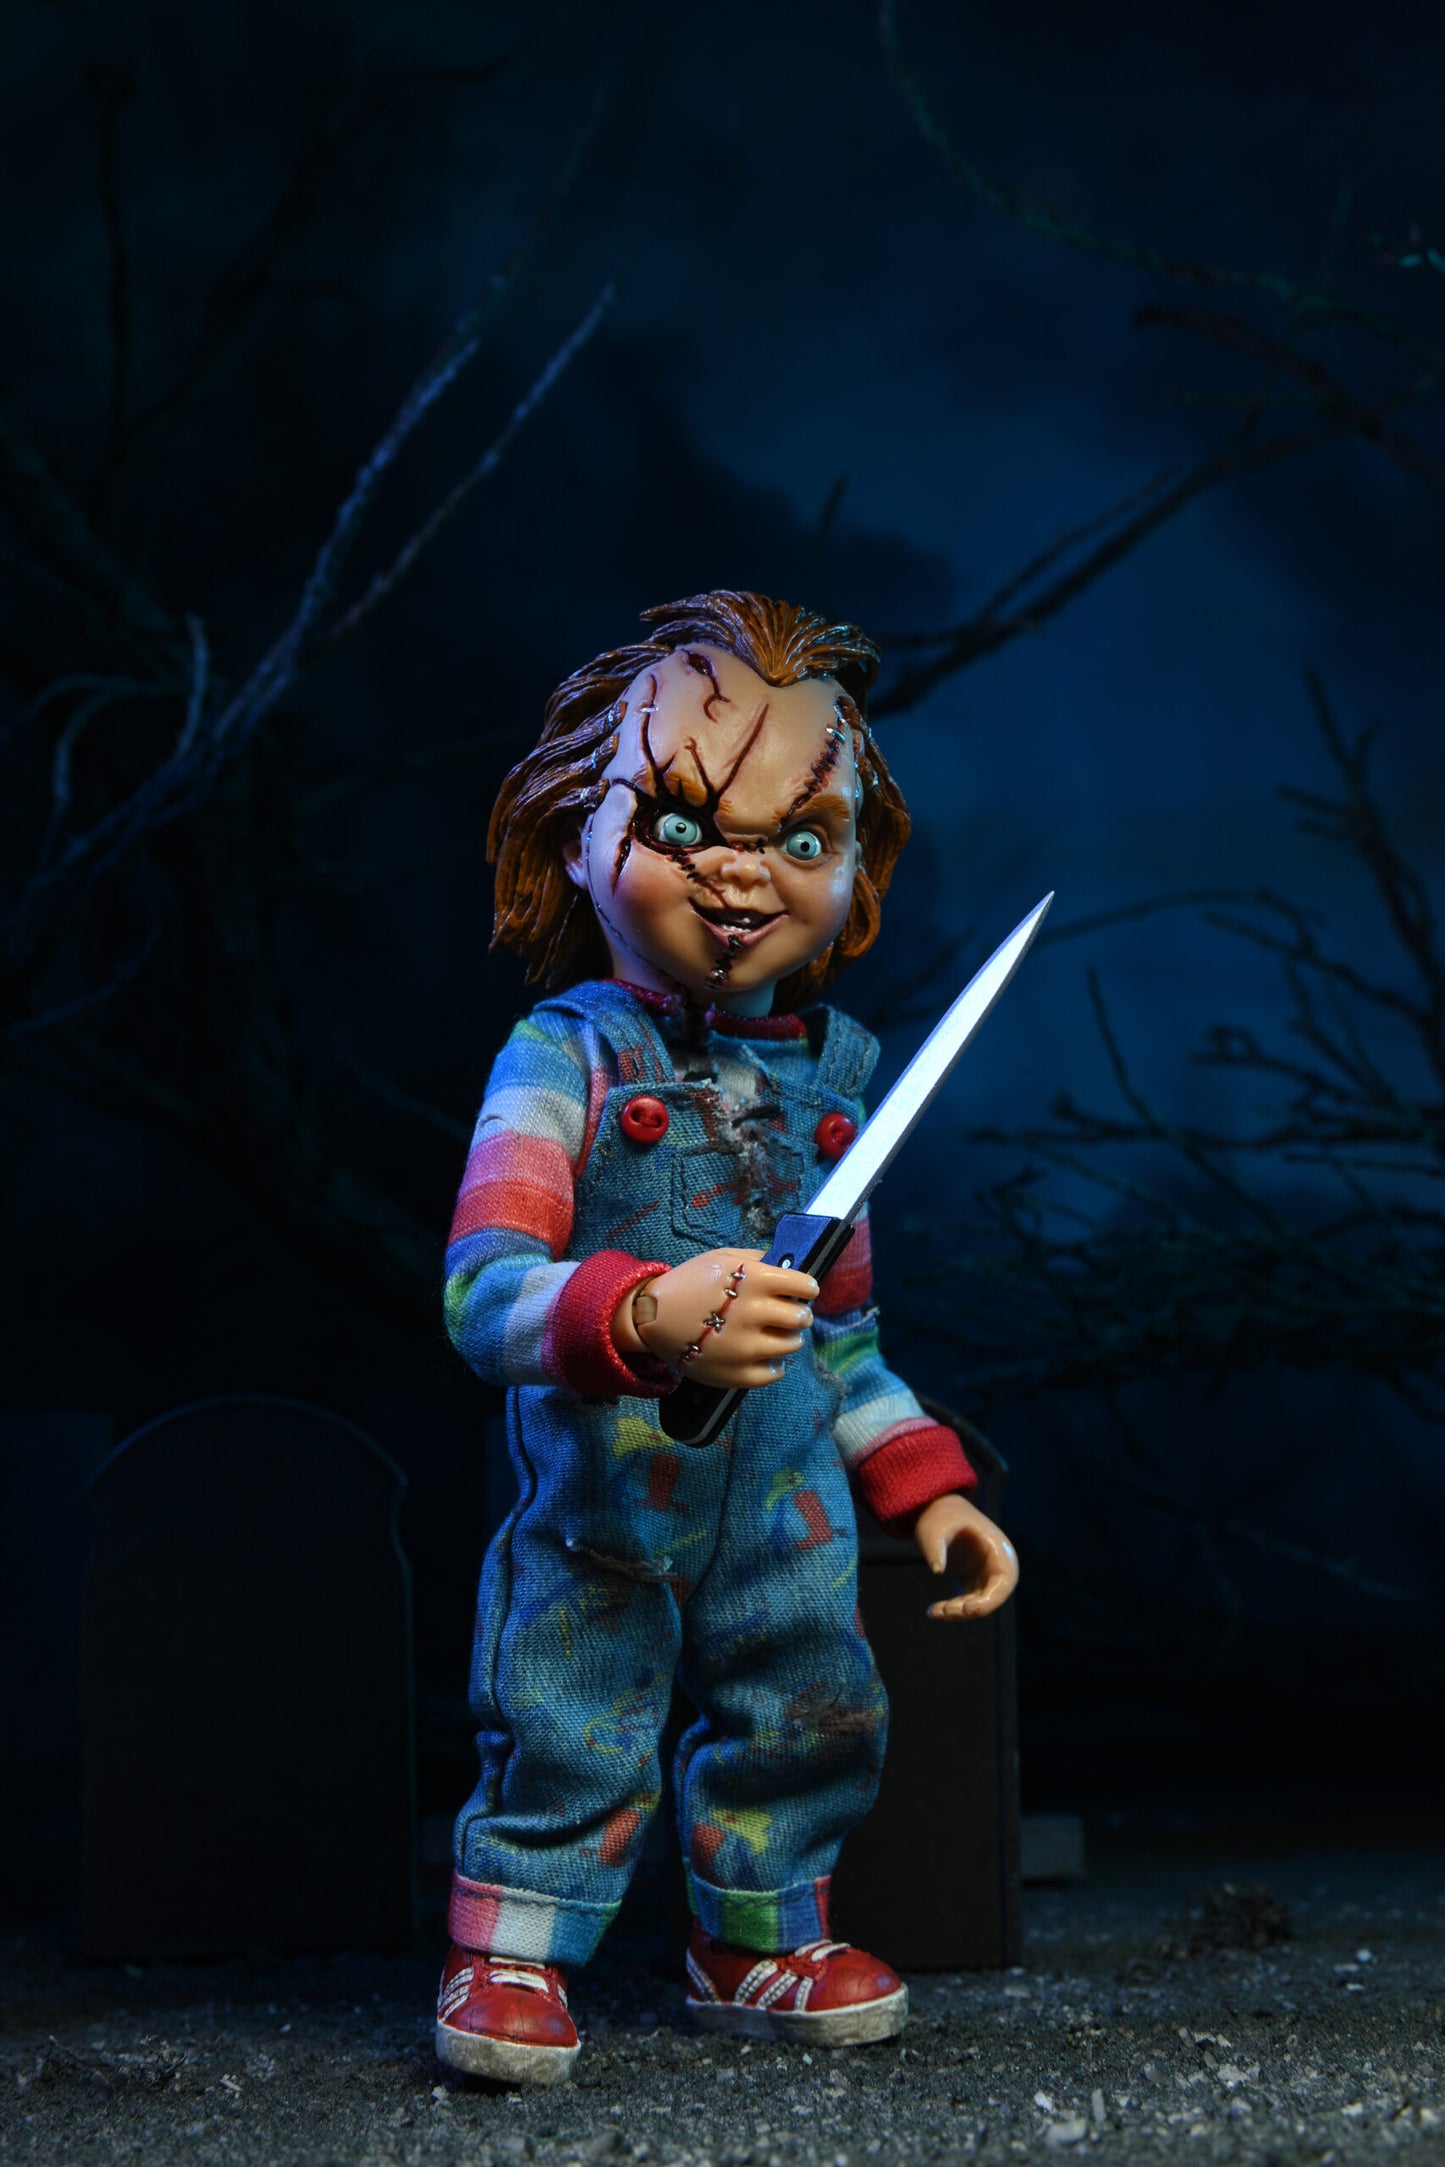 NECA - 8″ Scale Clothed Figure – Chucky & Tiffany 2-Pack